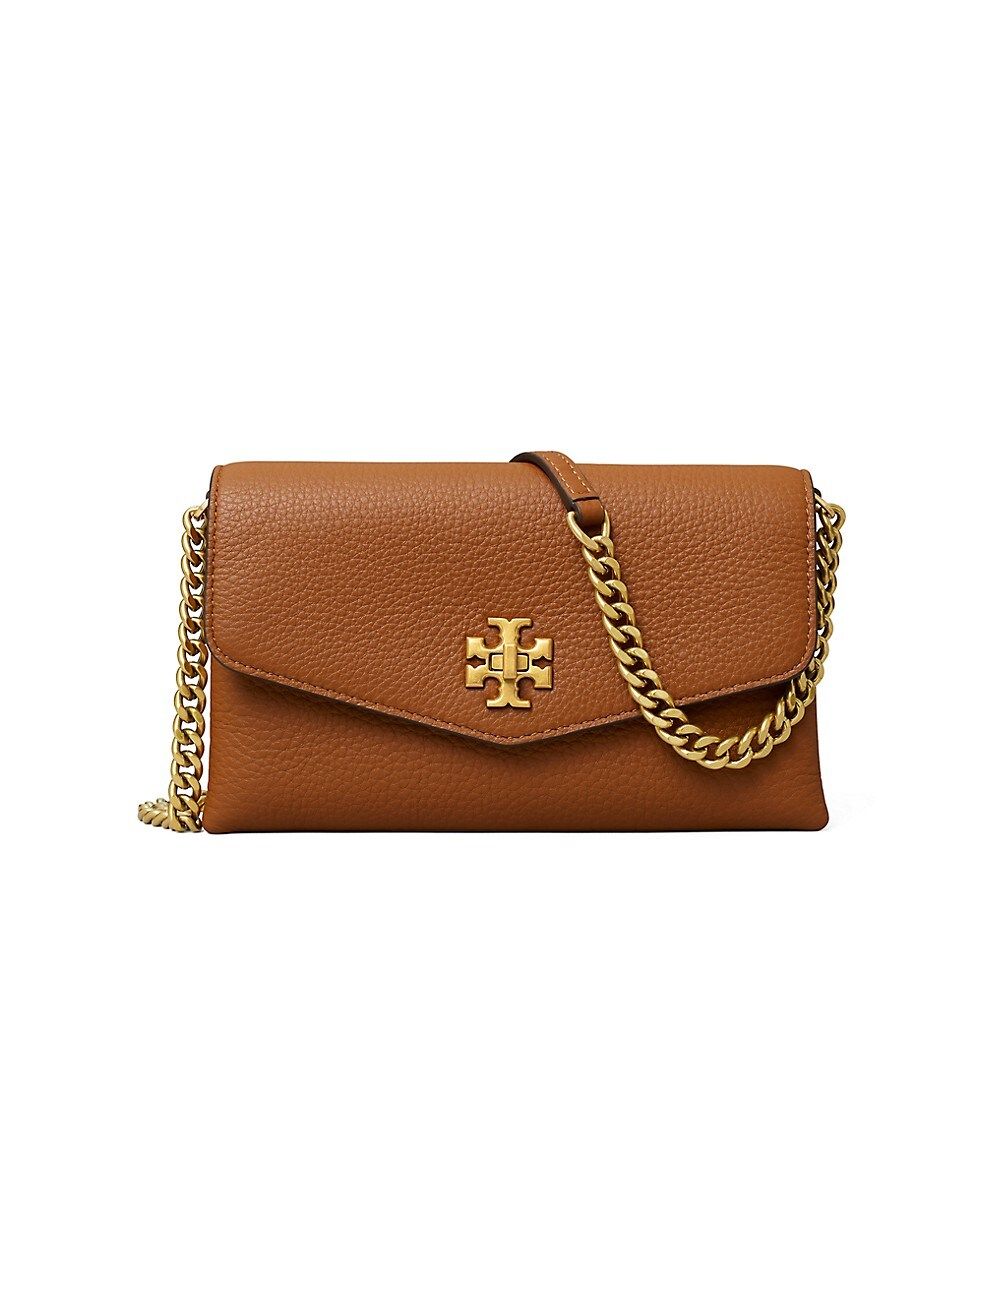 Kira Leather Wallet-On-Chain | Saks Fifth Avenue